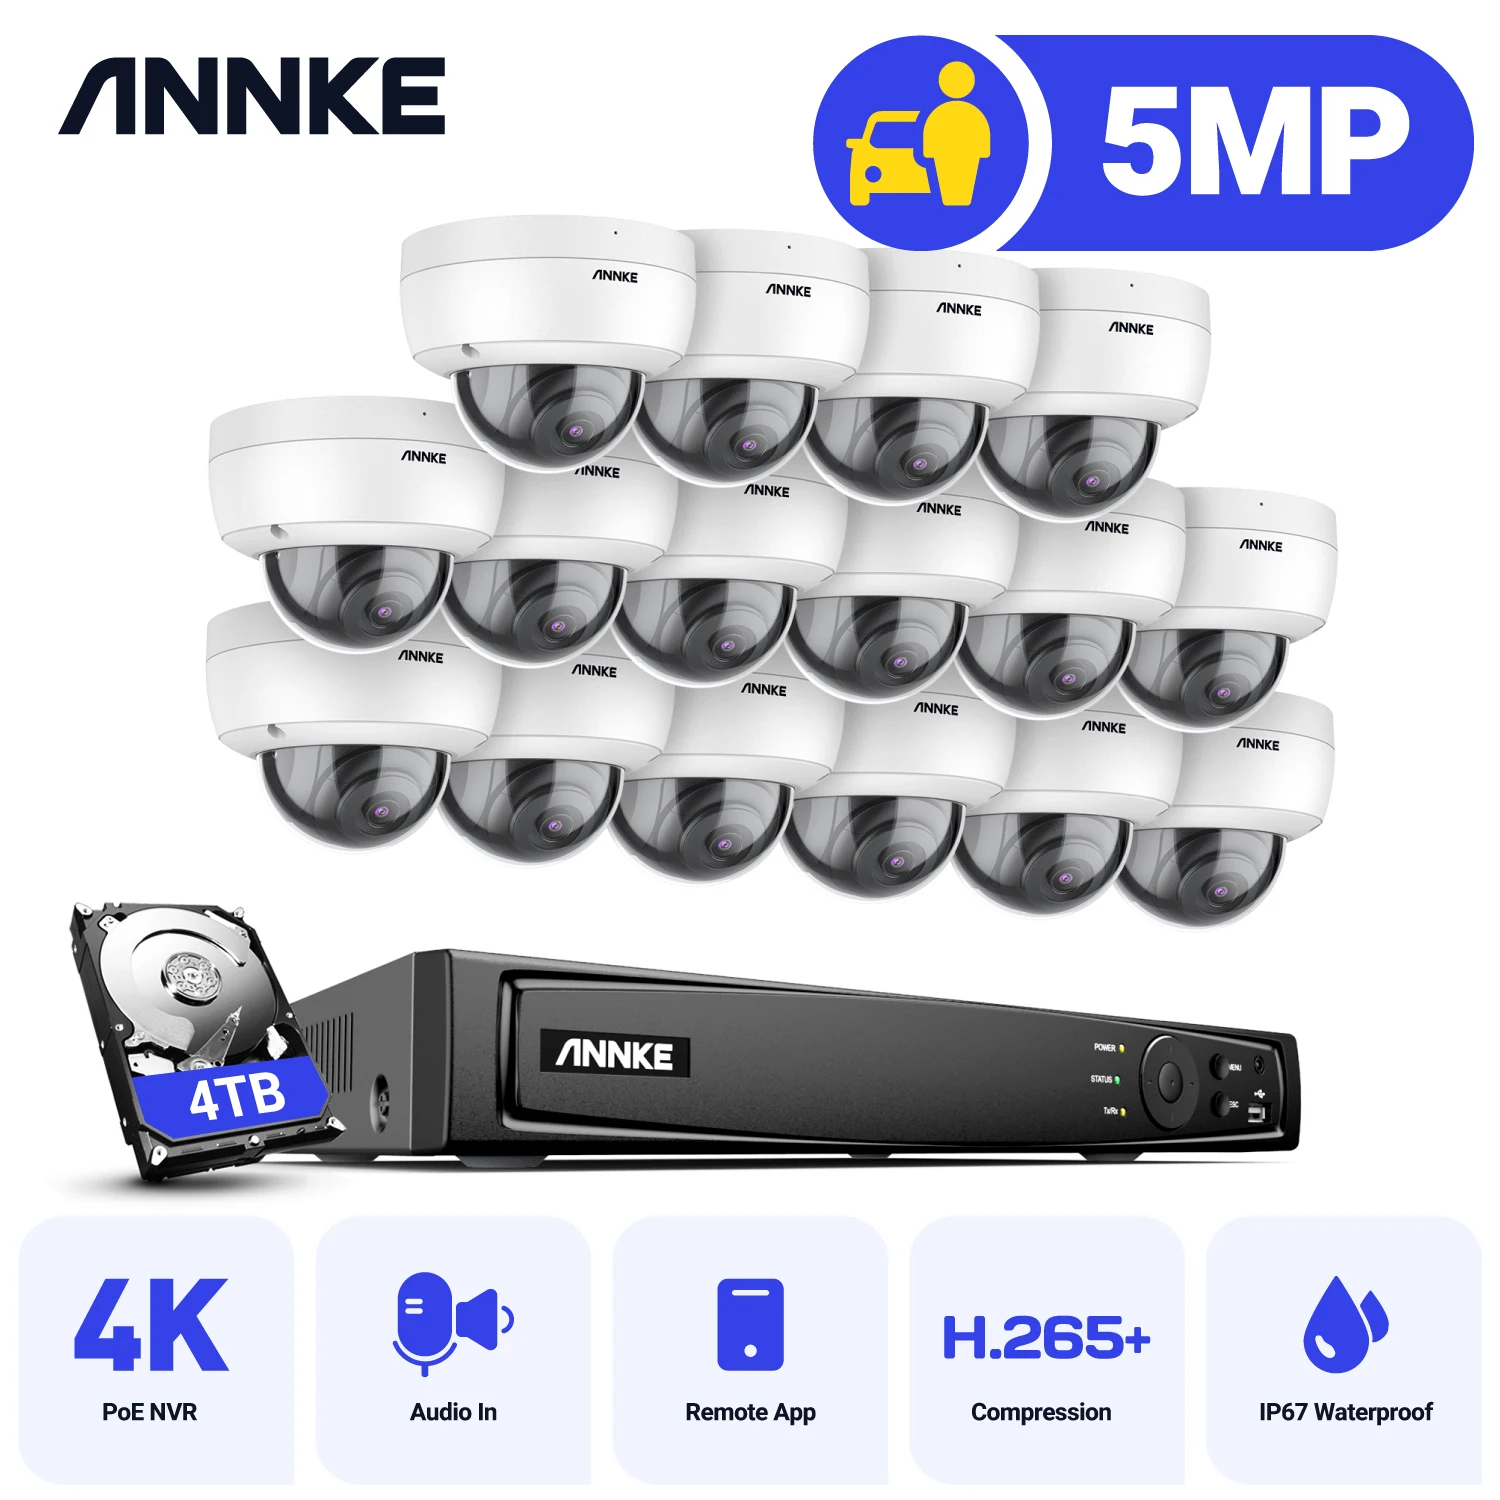 

ANNKE 5MP FHD POE Video Surveillance System 16CH H.265+ 8MP NVR Recorder 5MP Security Cameras Audio Recording 5MP PoE Ip camera